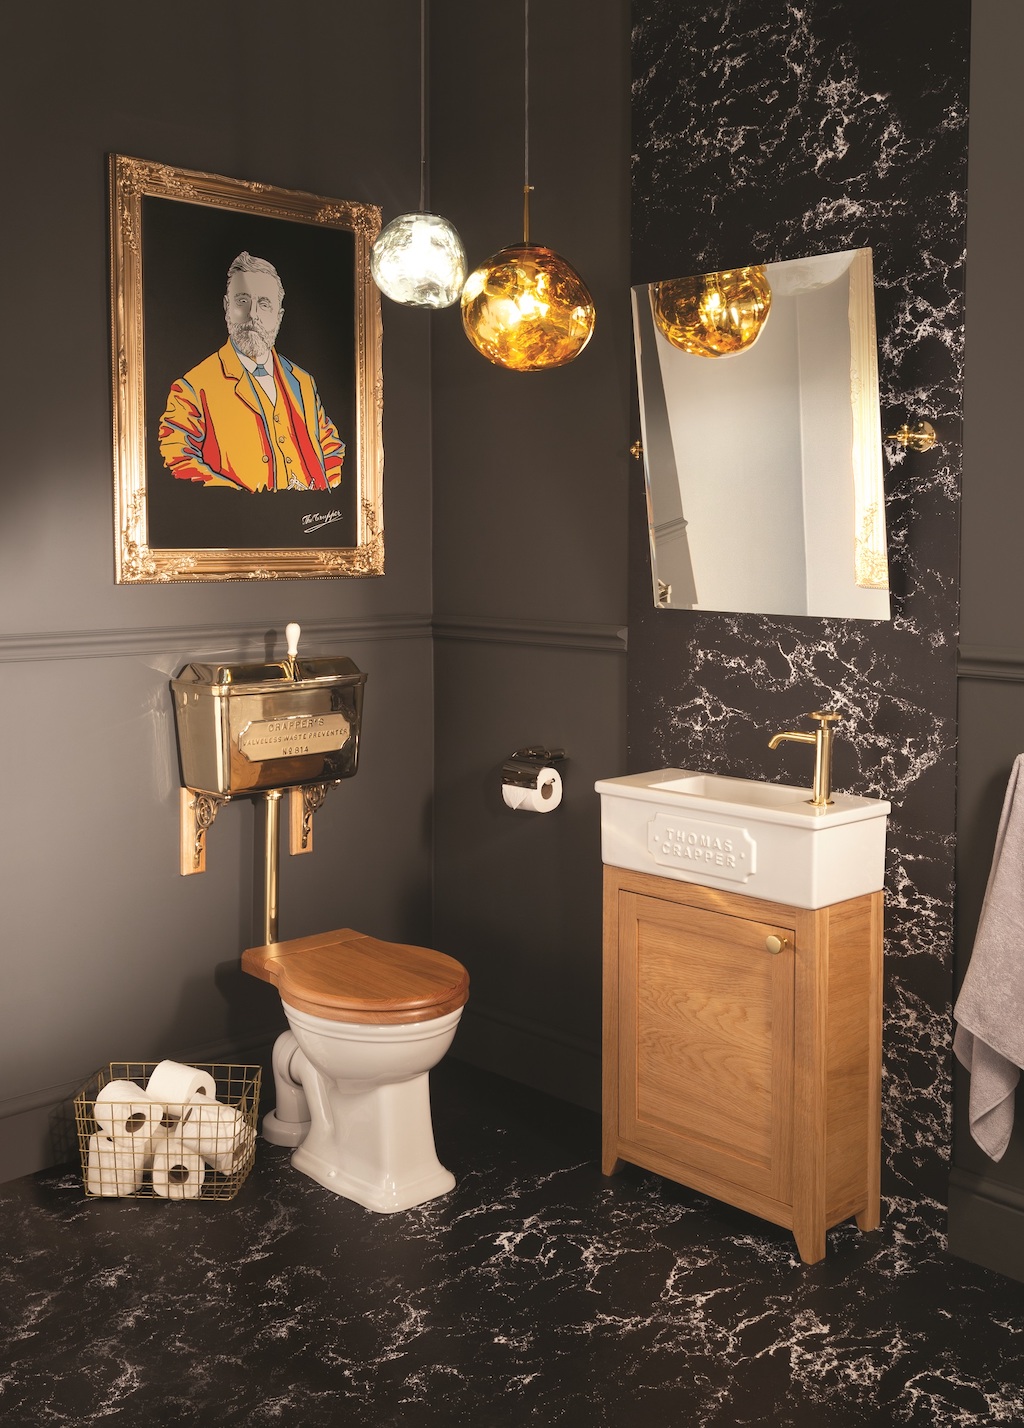 Thomas Crapper | Bathrooms brought to book